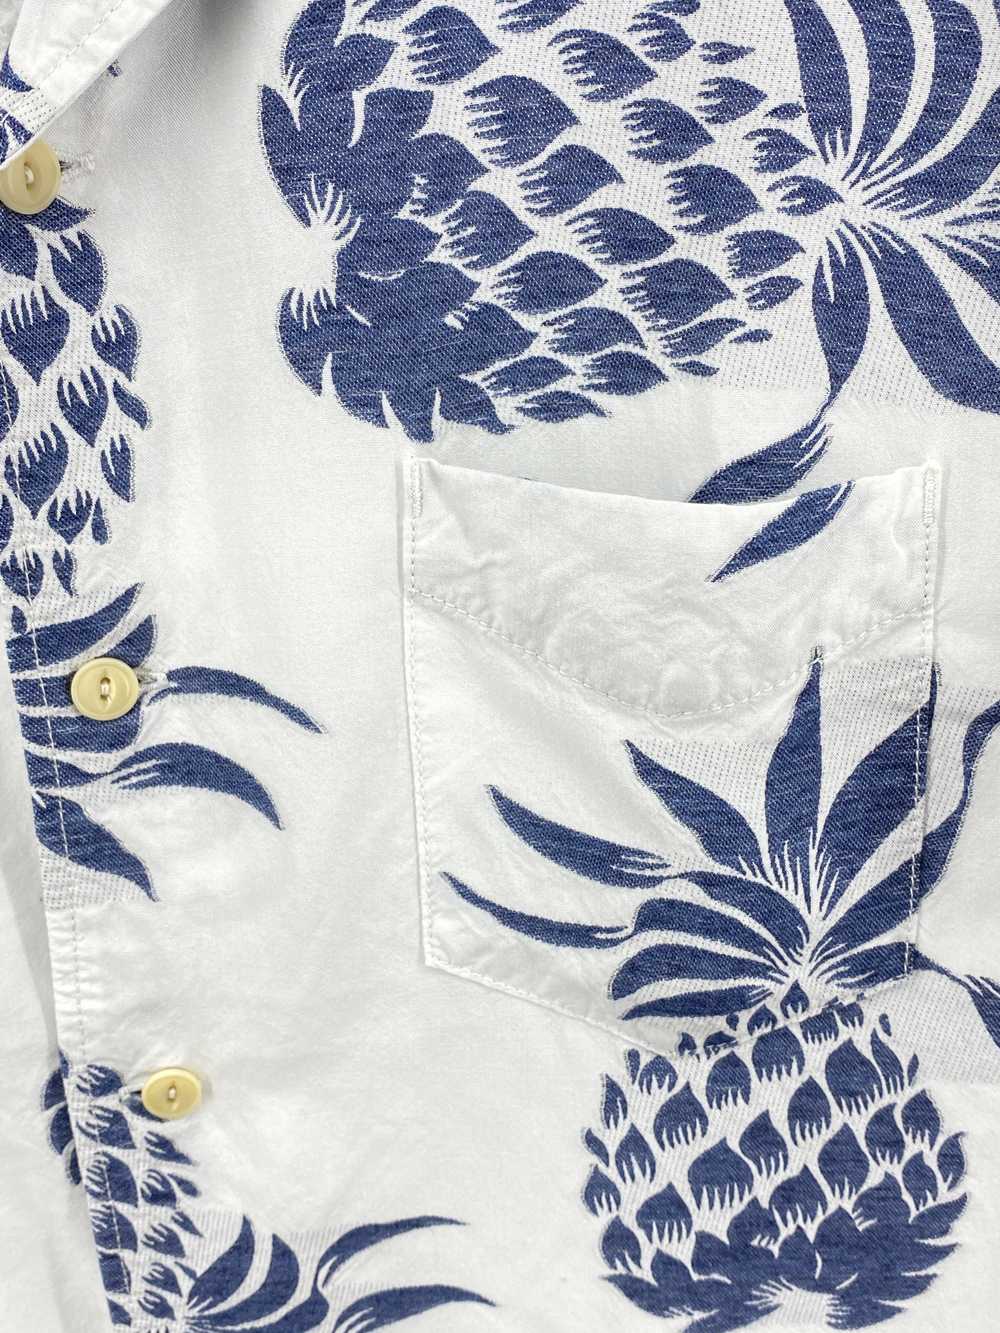 Remi Relief - Pineapple Camp Shirt - image 3